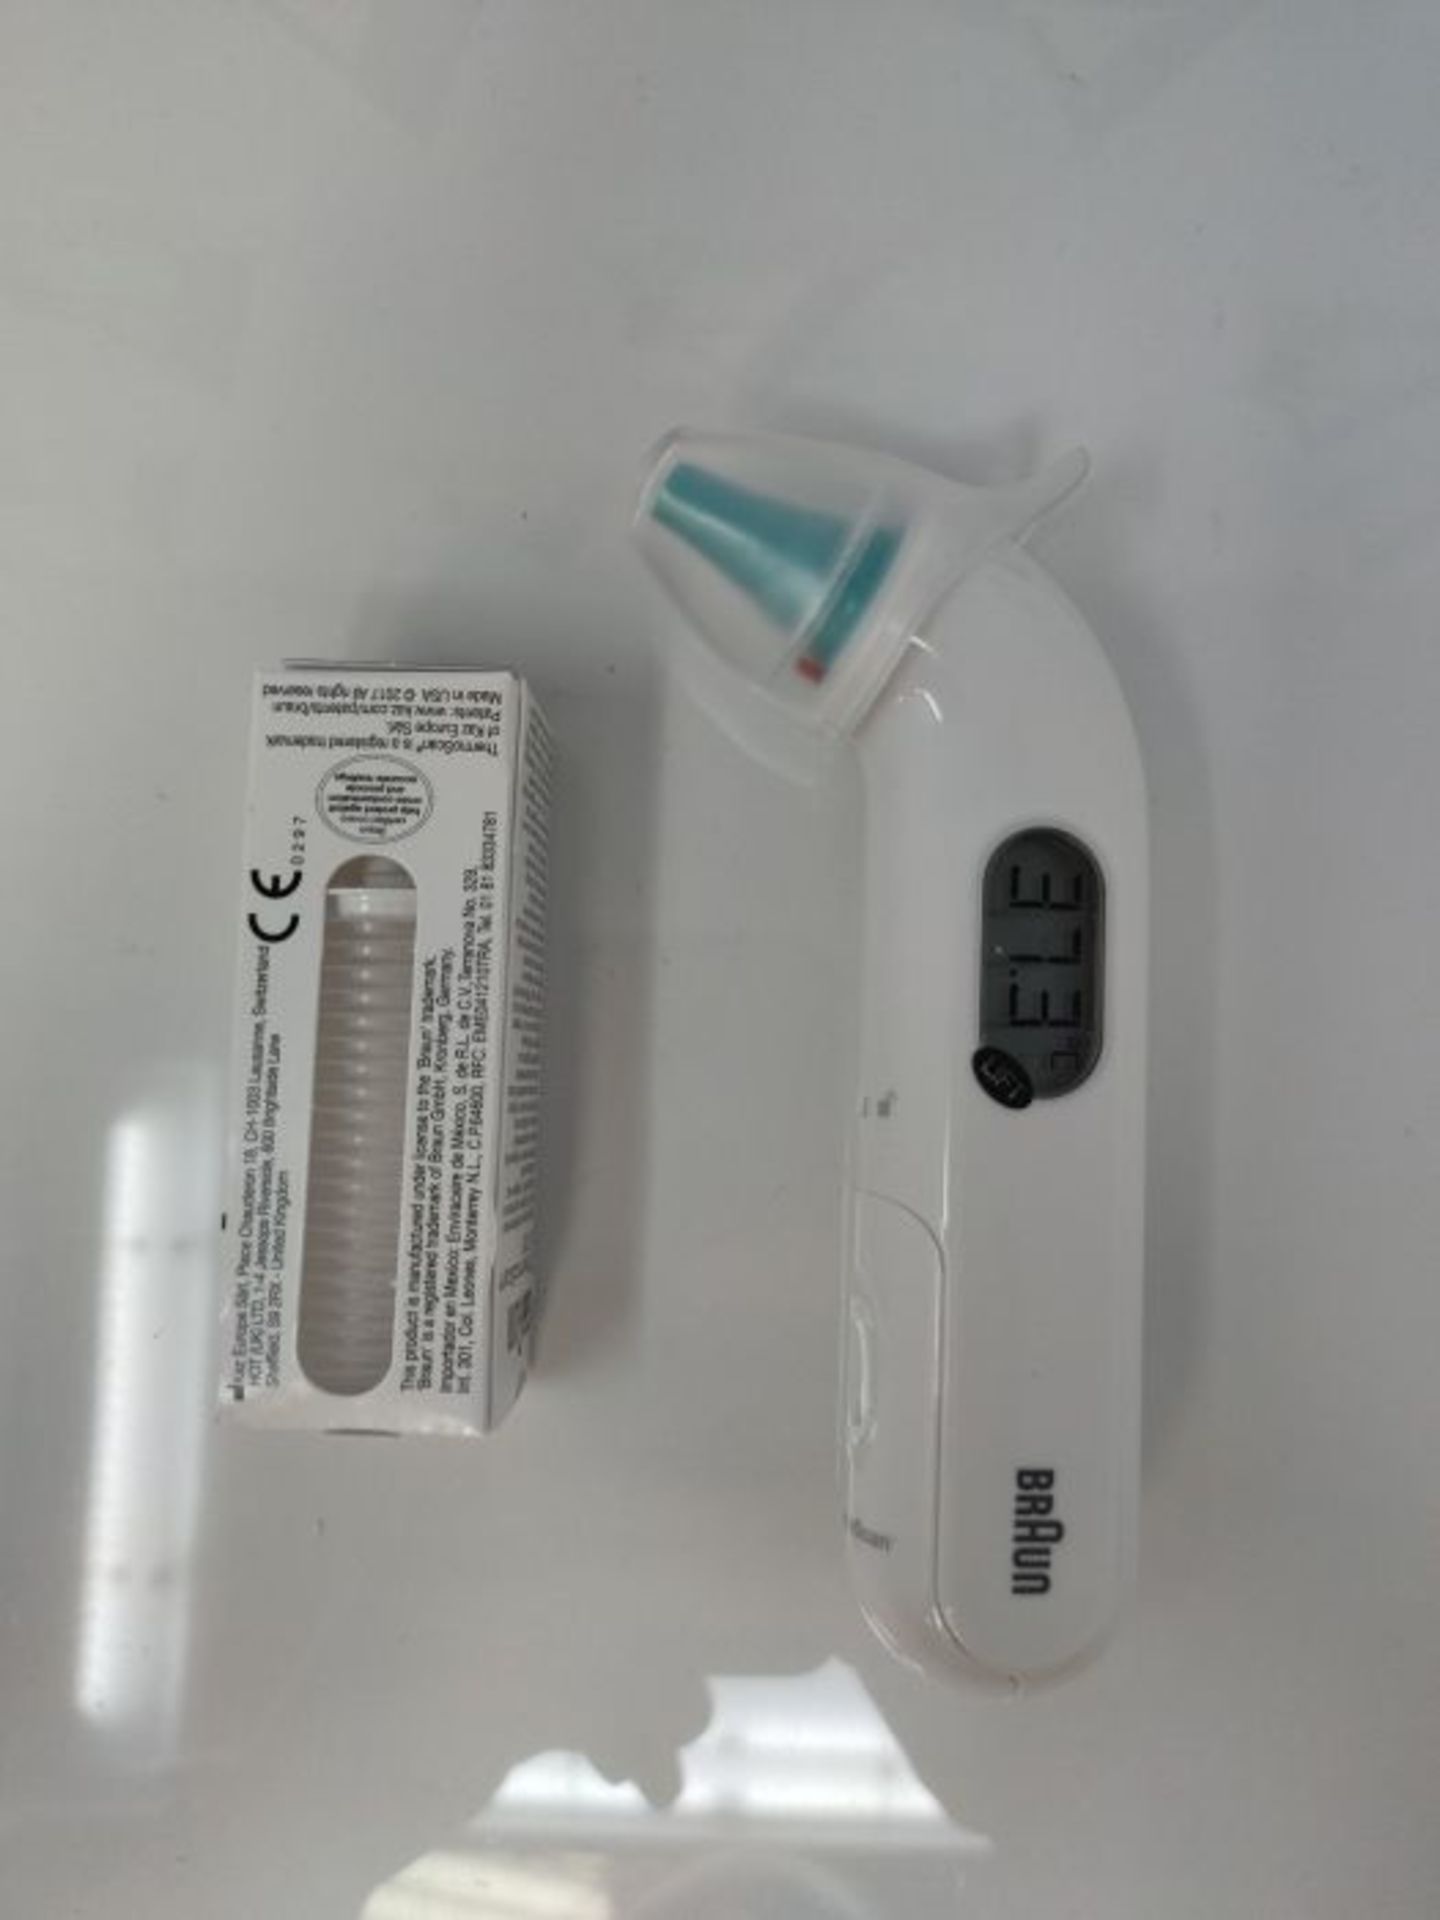 Braun Infrared Ear Thermometer - Image 3 of 3